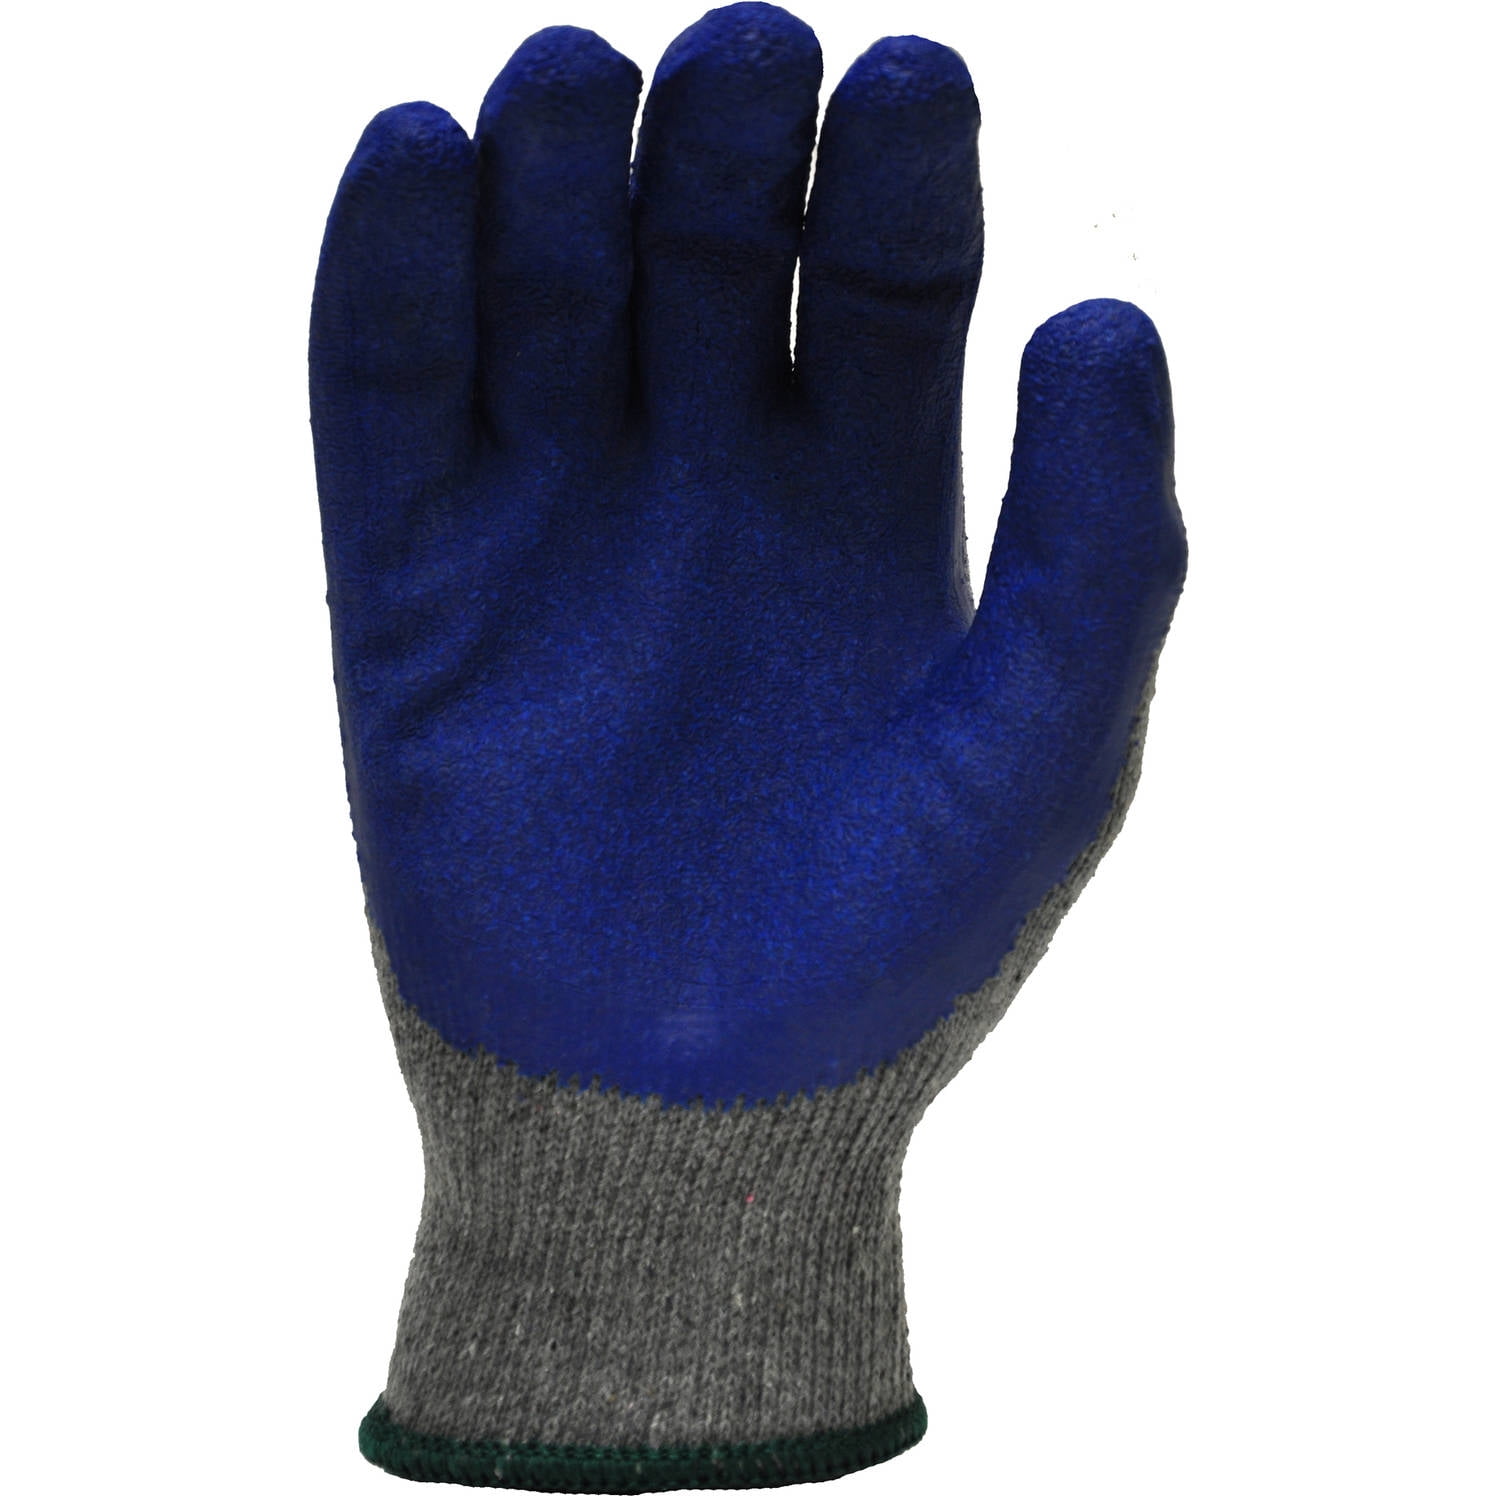 G & F Knit Work Gloves 3100S-DZ, Textured Rubber Latex Coated, 12-Pairs,  Men's Size Small 